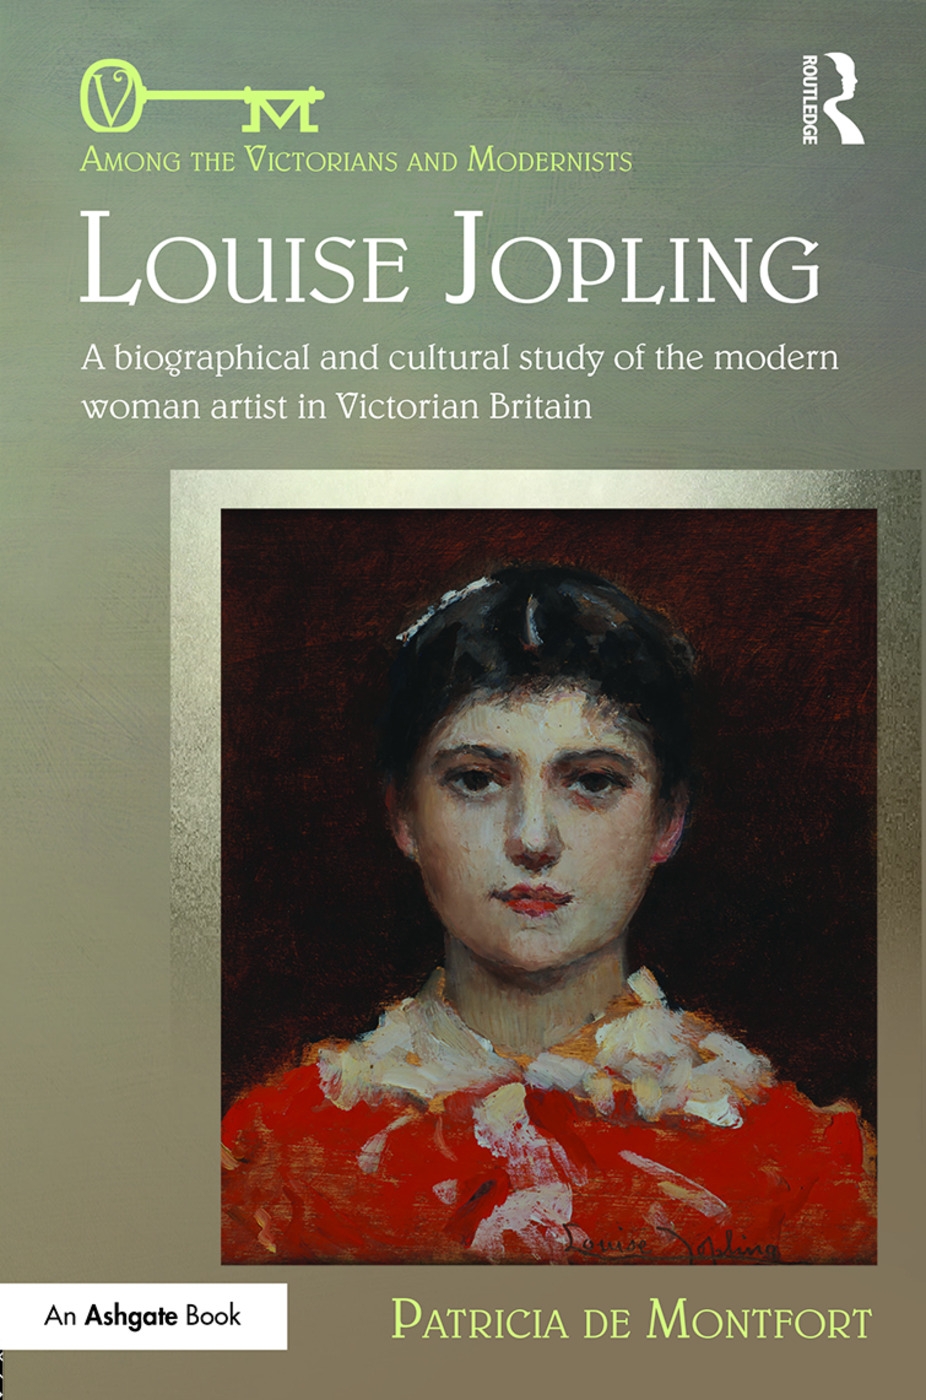 Louise Jopling: A biographical and cultural study of the modern woman artist in Victorian Britain